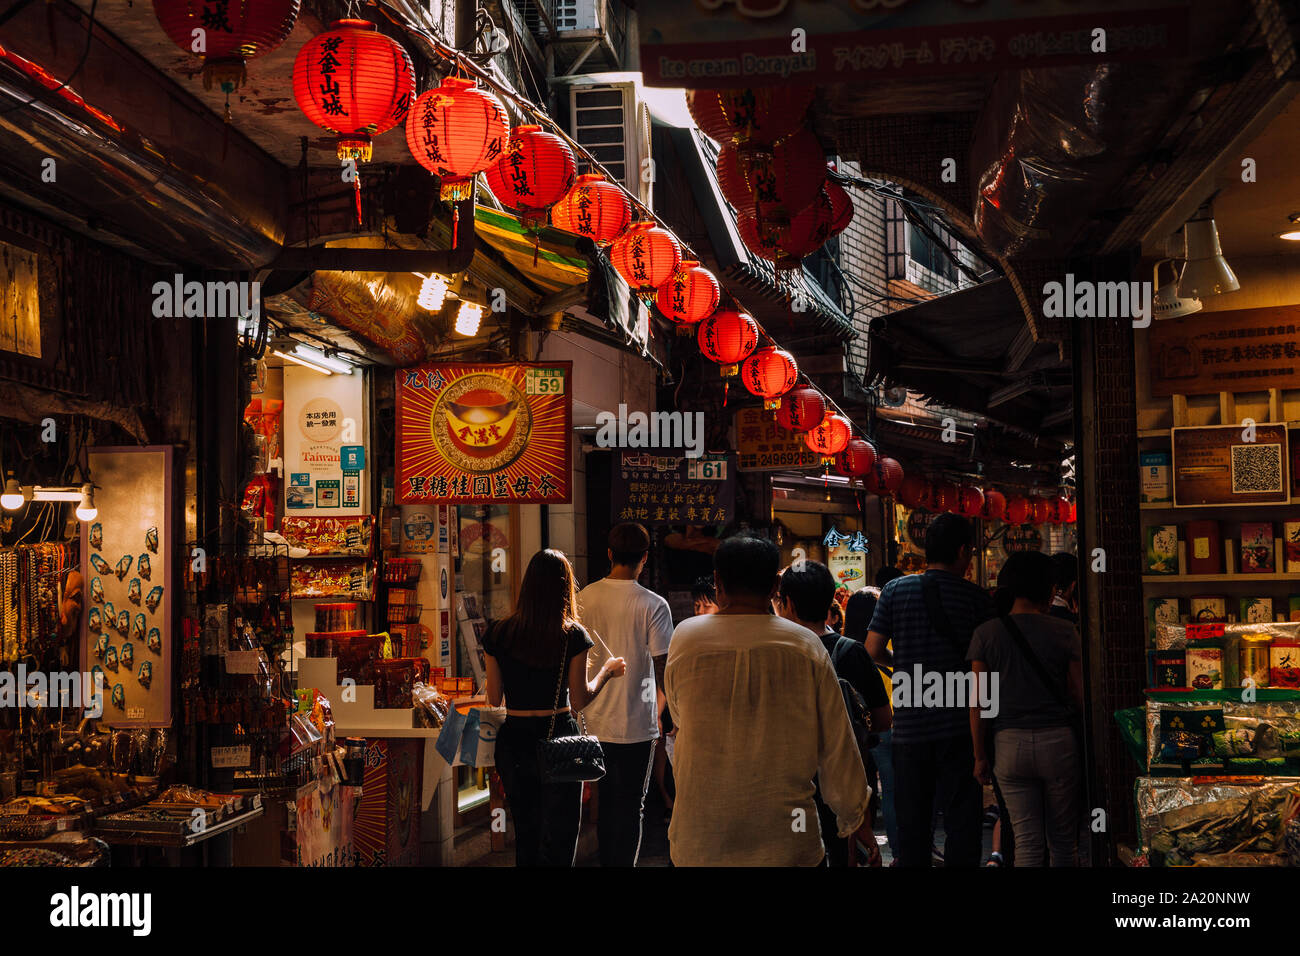 Jiufen, Taiwan - November 07, 2018: A young woman walks in the crowd at the Old Street market on November 7, 2018, in Jiufen, Taiwan Stock Photo